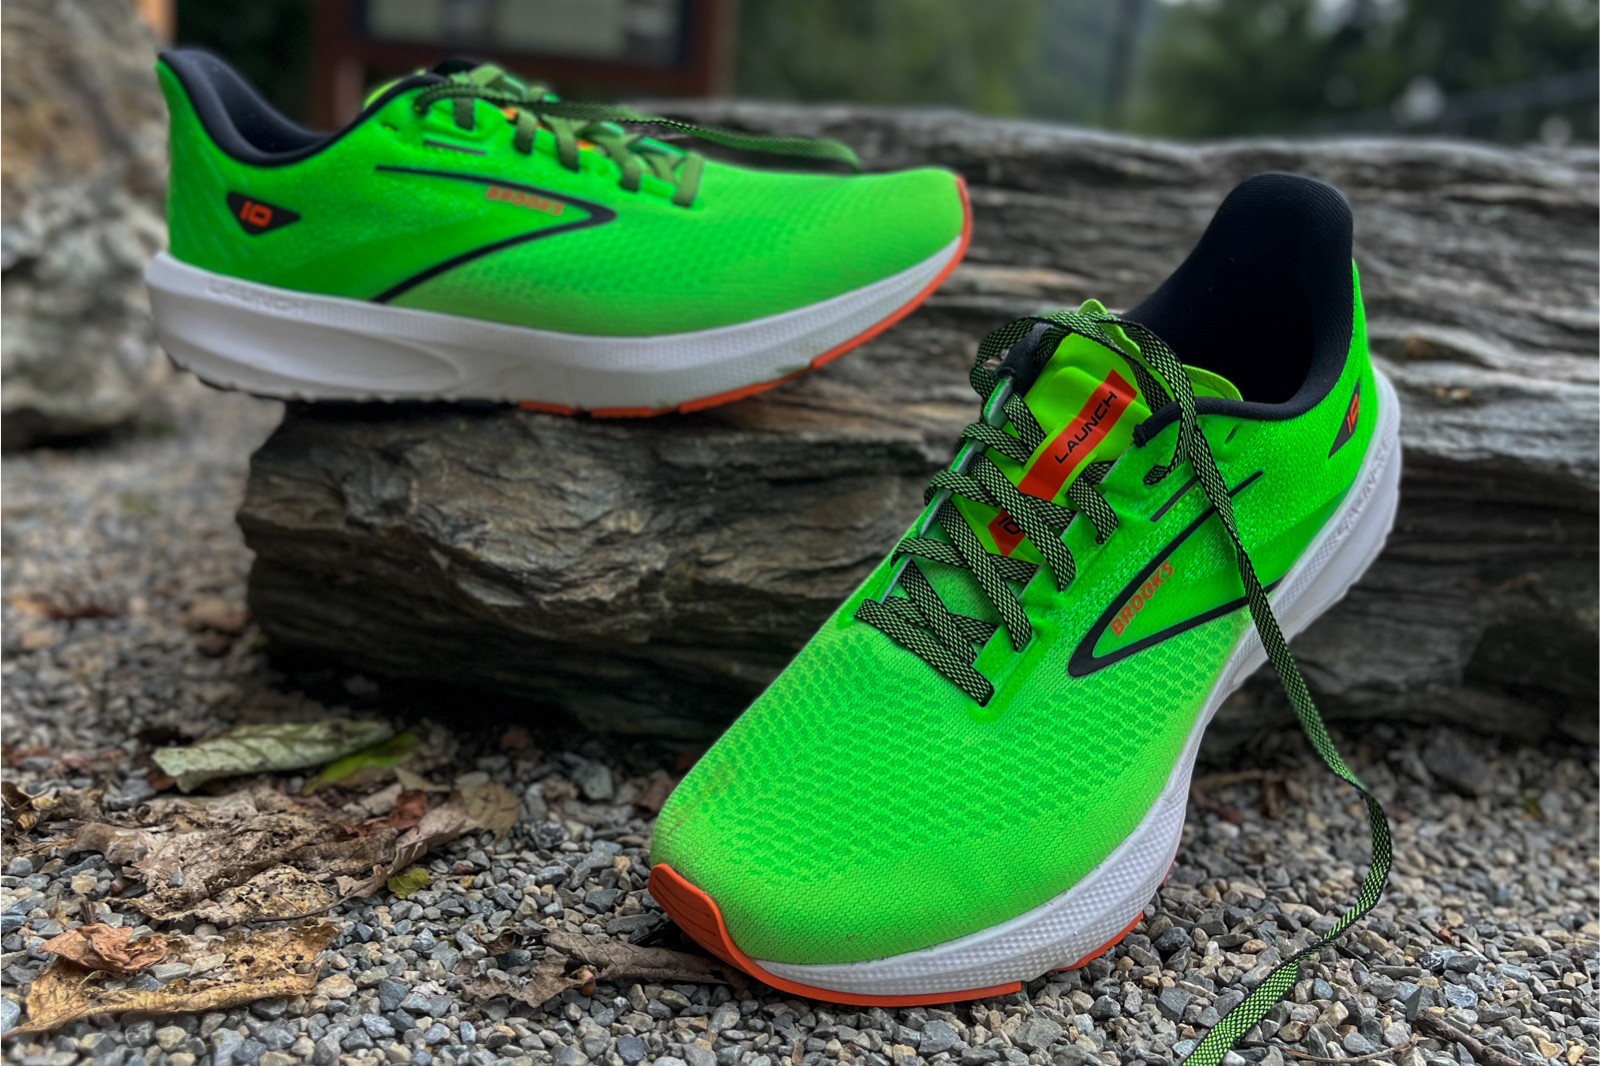 Brooks' Most-Popular Running Shoe Is On Sale For Just $100 RN